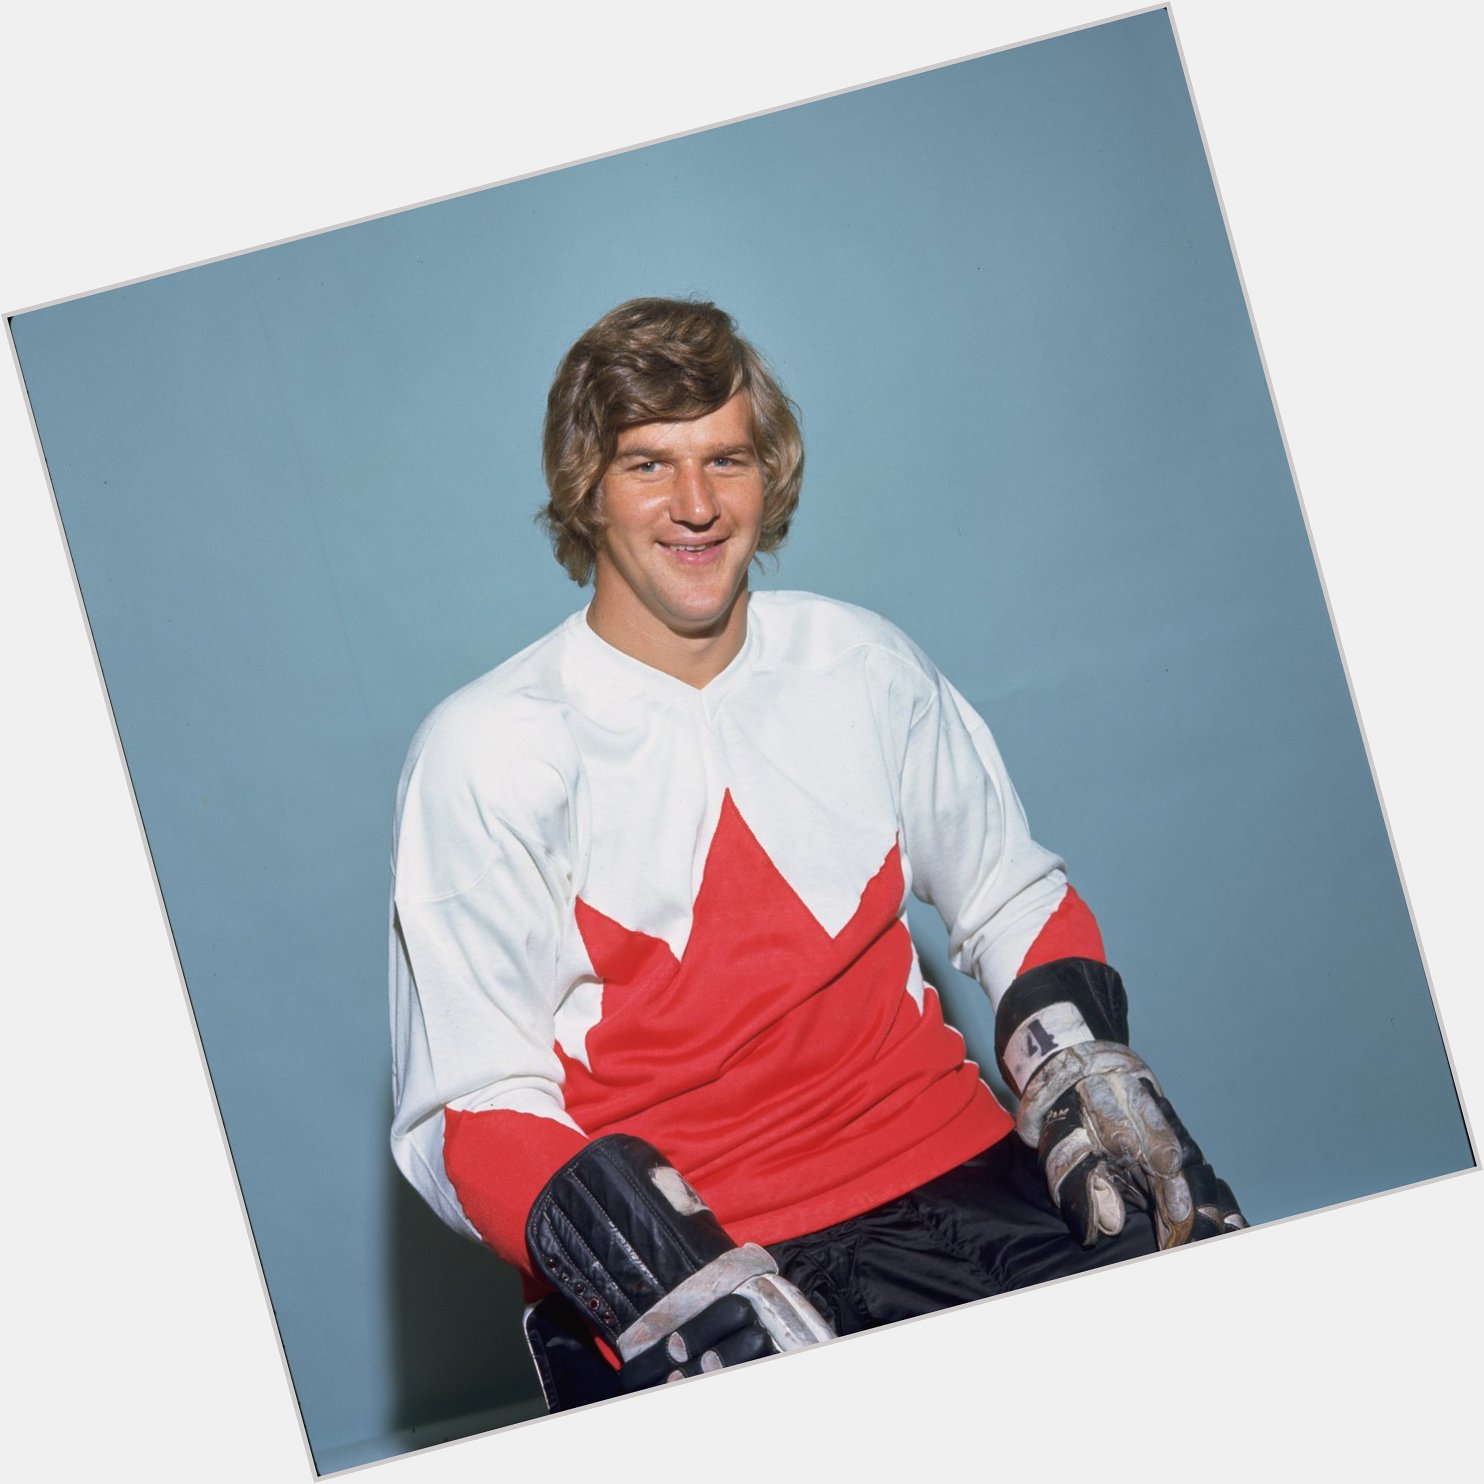 Look at that flow! Happy birthday, Mr. Bobby Orr. 